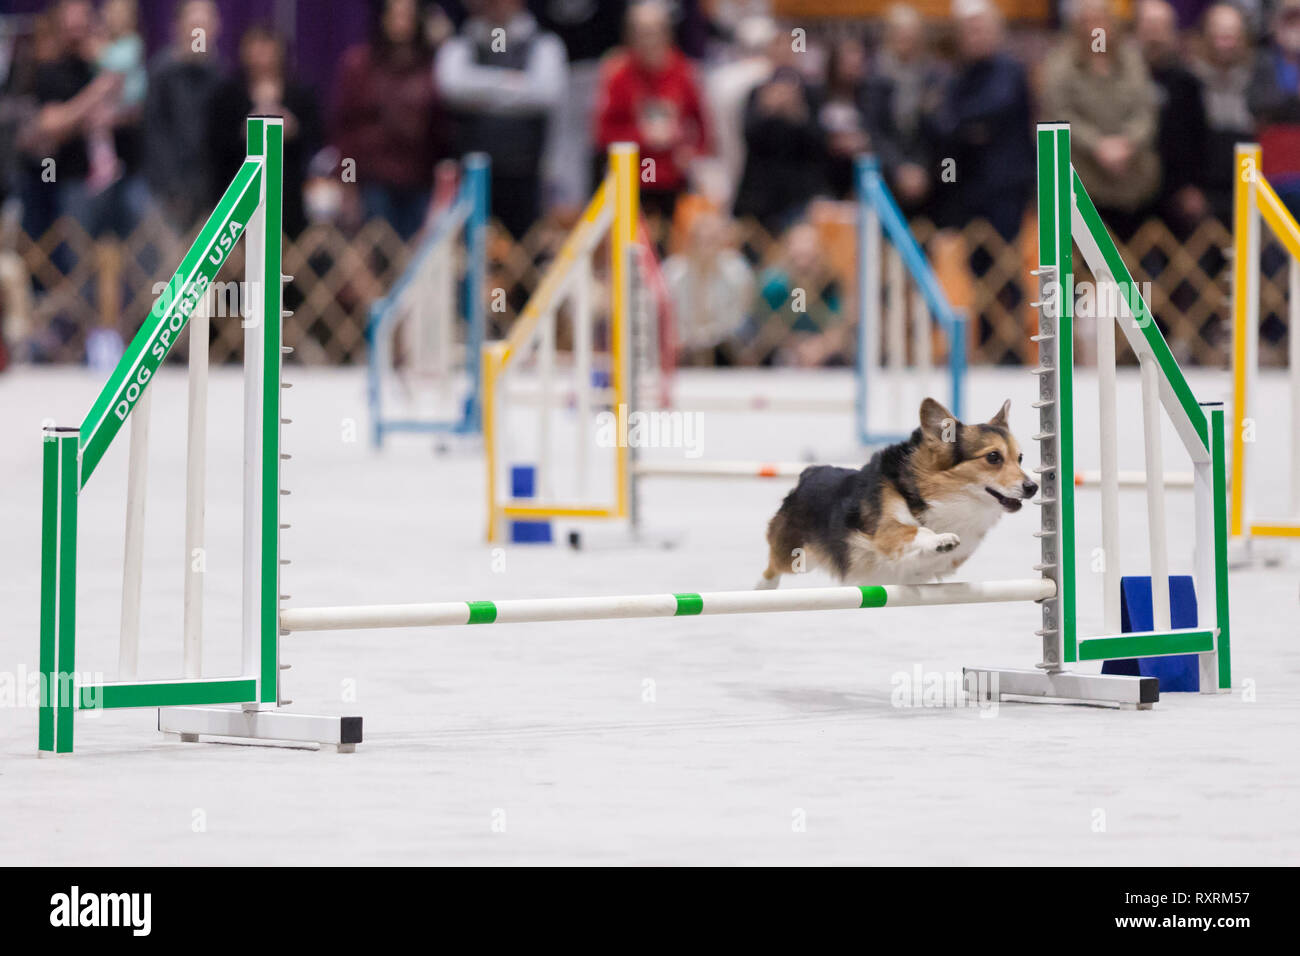 Seattle, USA. 09th Mar, 2019. A Pembroke Welsh Corgi jumps a hurdle in the agility ring at the 2019 Seattle Kennel Club Dog Show. Approximately 160 different breeds participate in the annual All-Breed dog show. Credit: Paul Christian Gordon/Alamy Live News Stock Photo